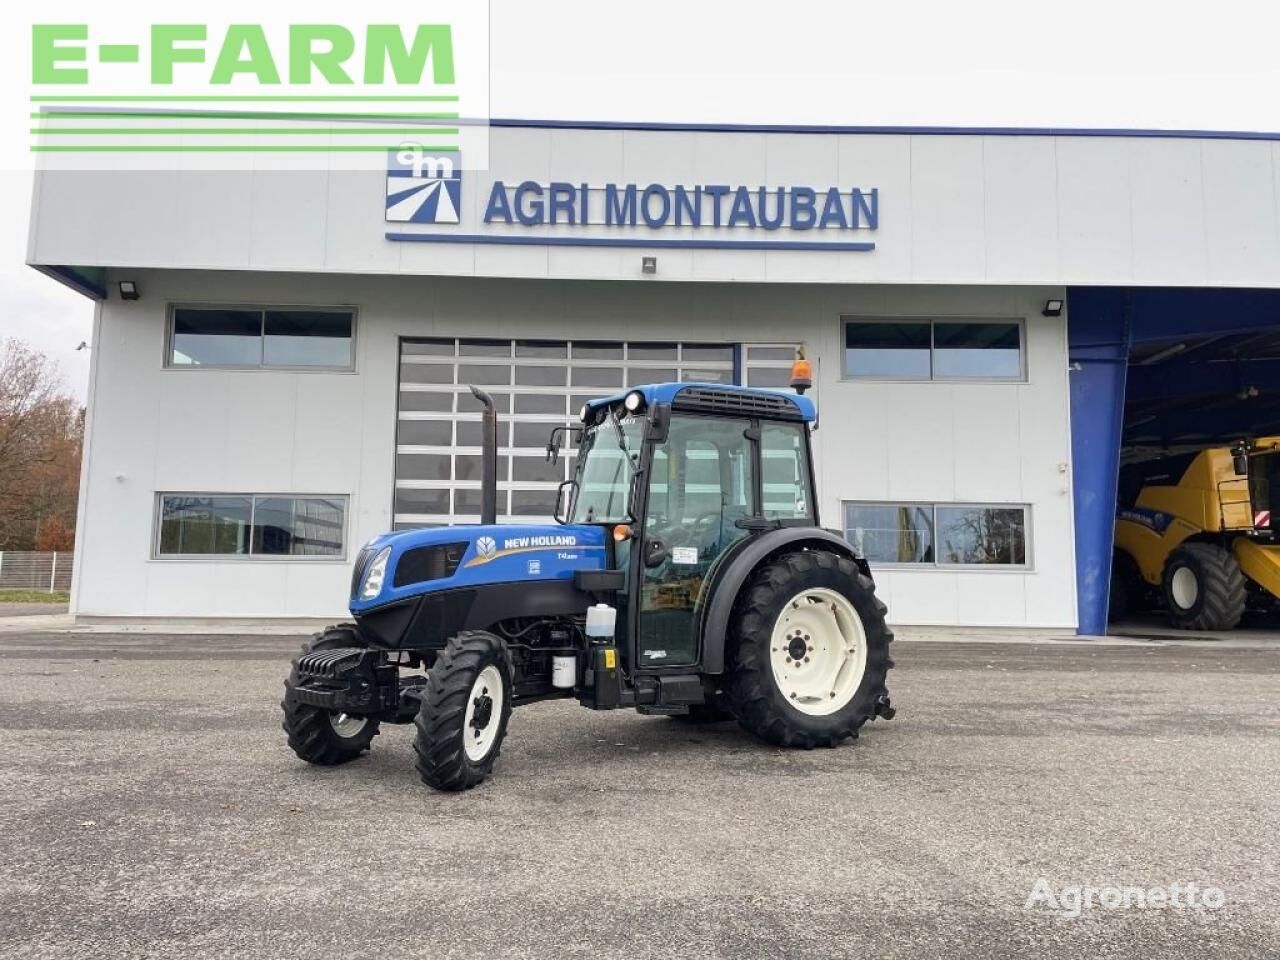 New Holland t 4.95n wheel tractor